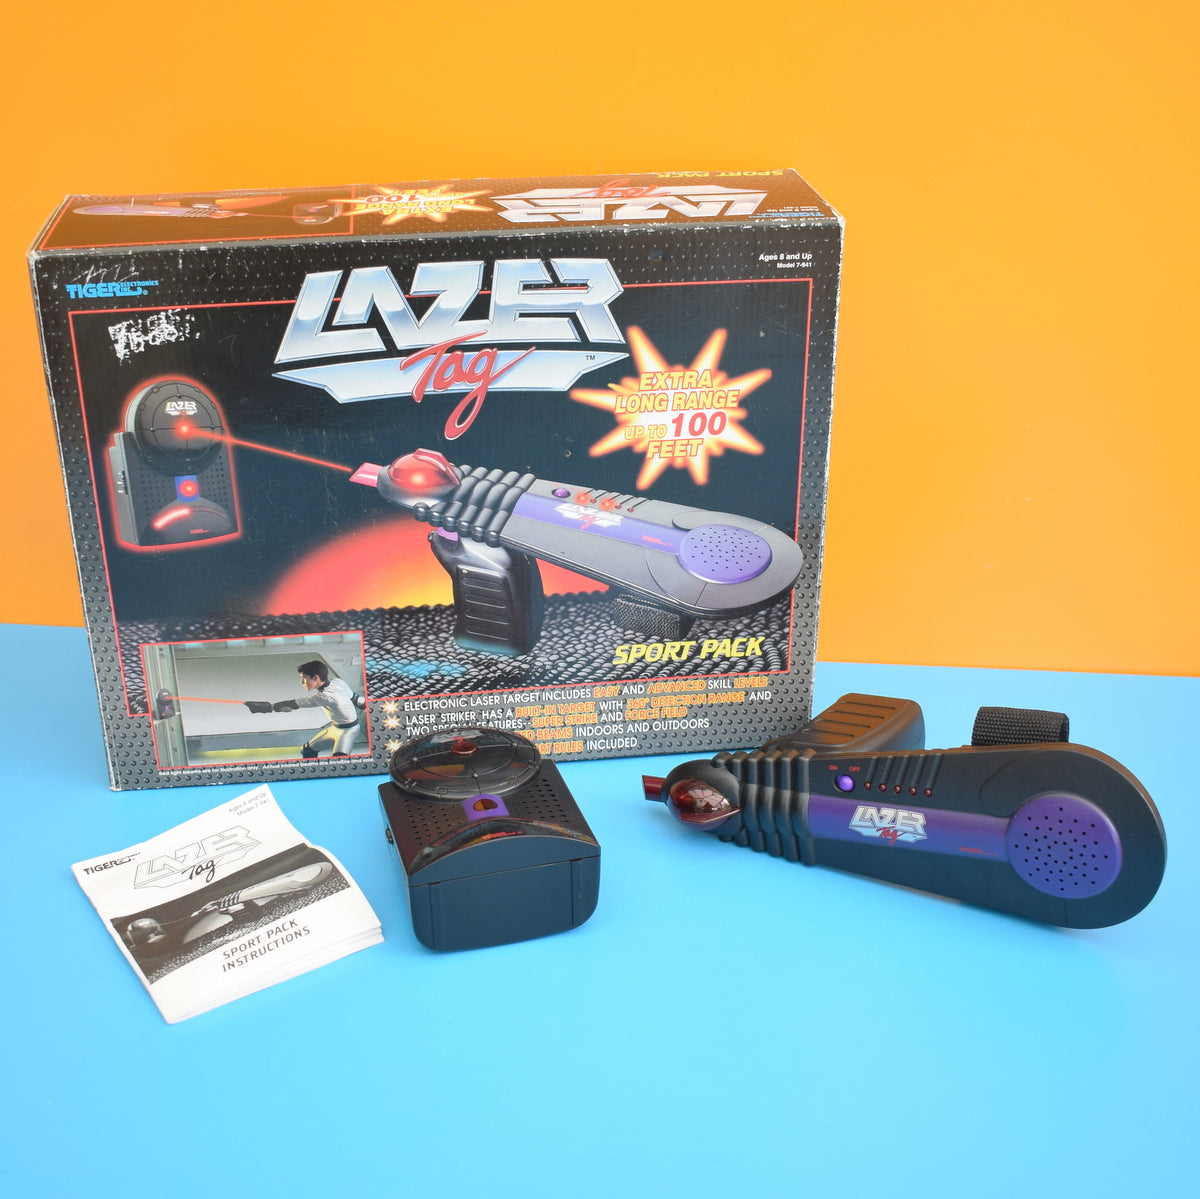 Vintage 1990s Tiger - Electronic Lazer Tag Game System - Boxed